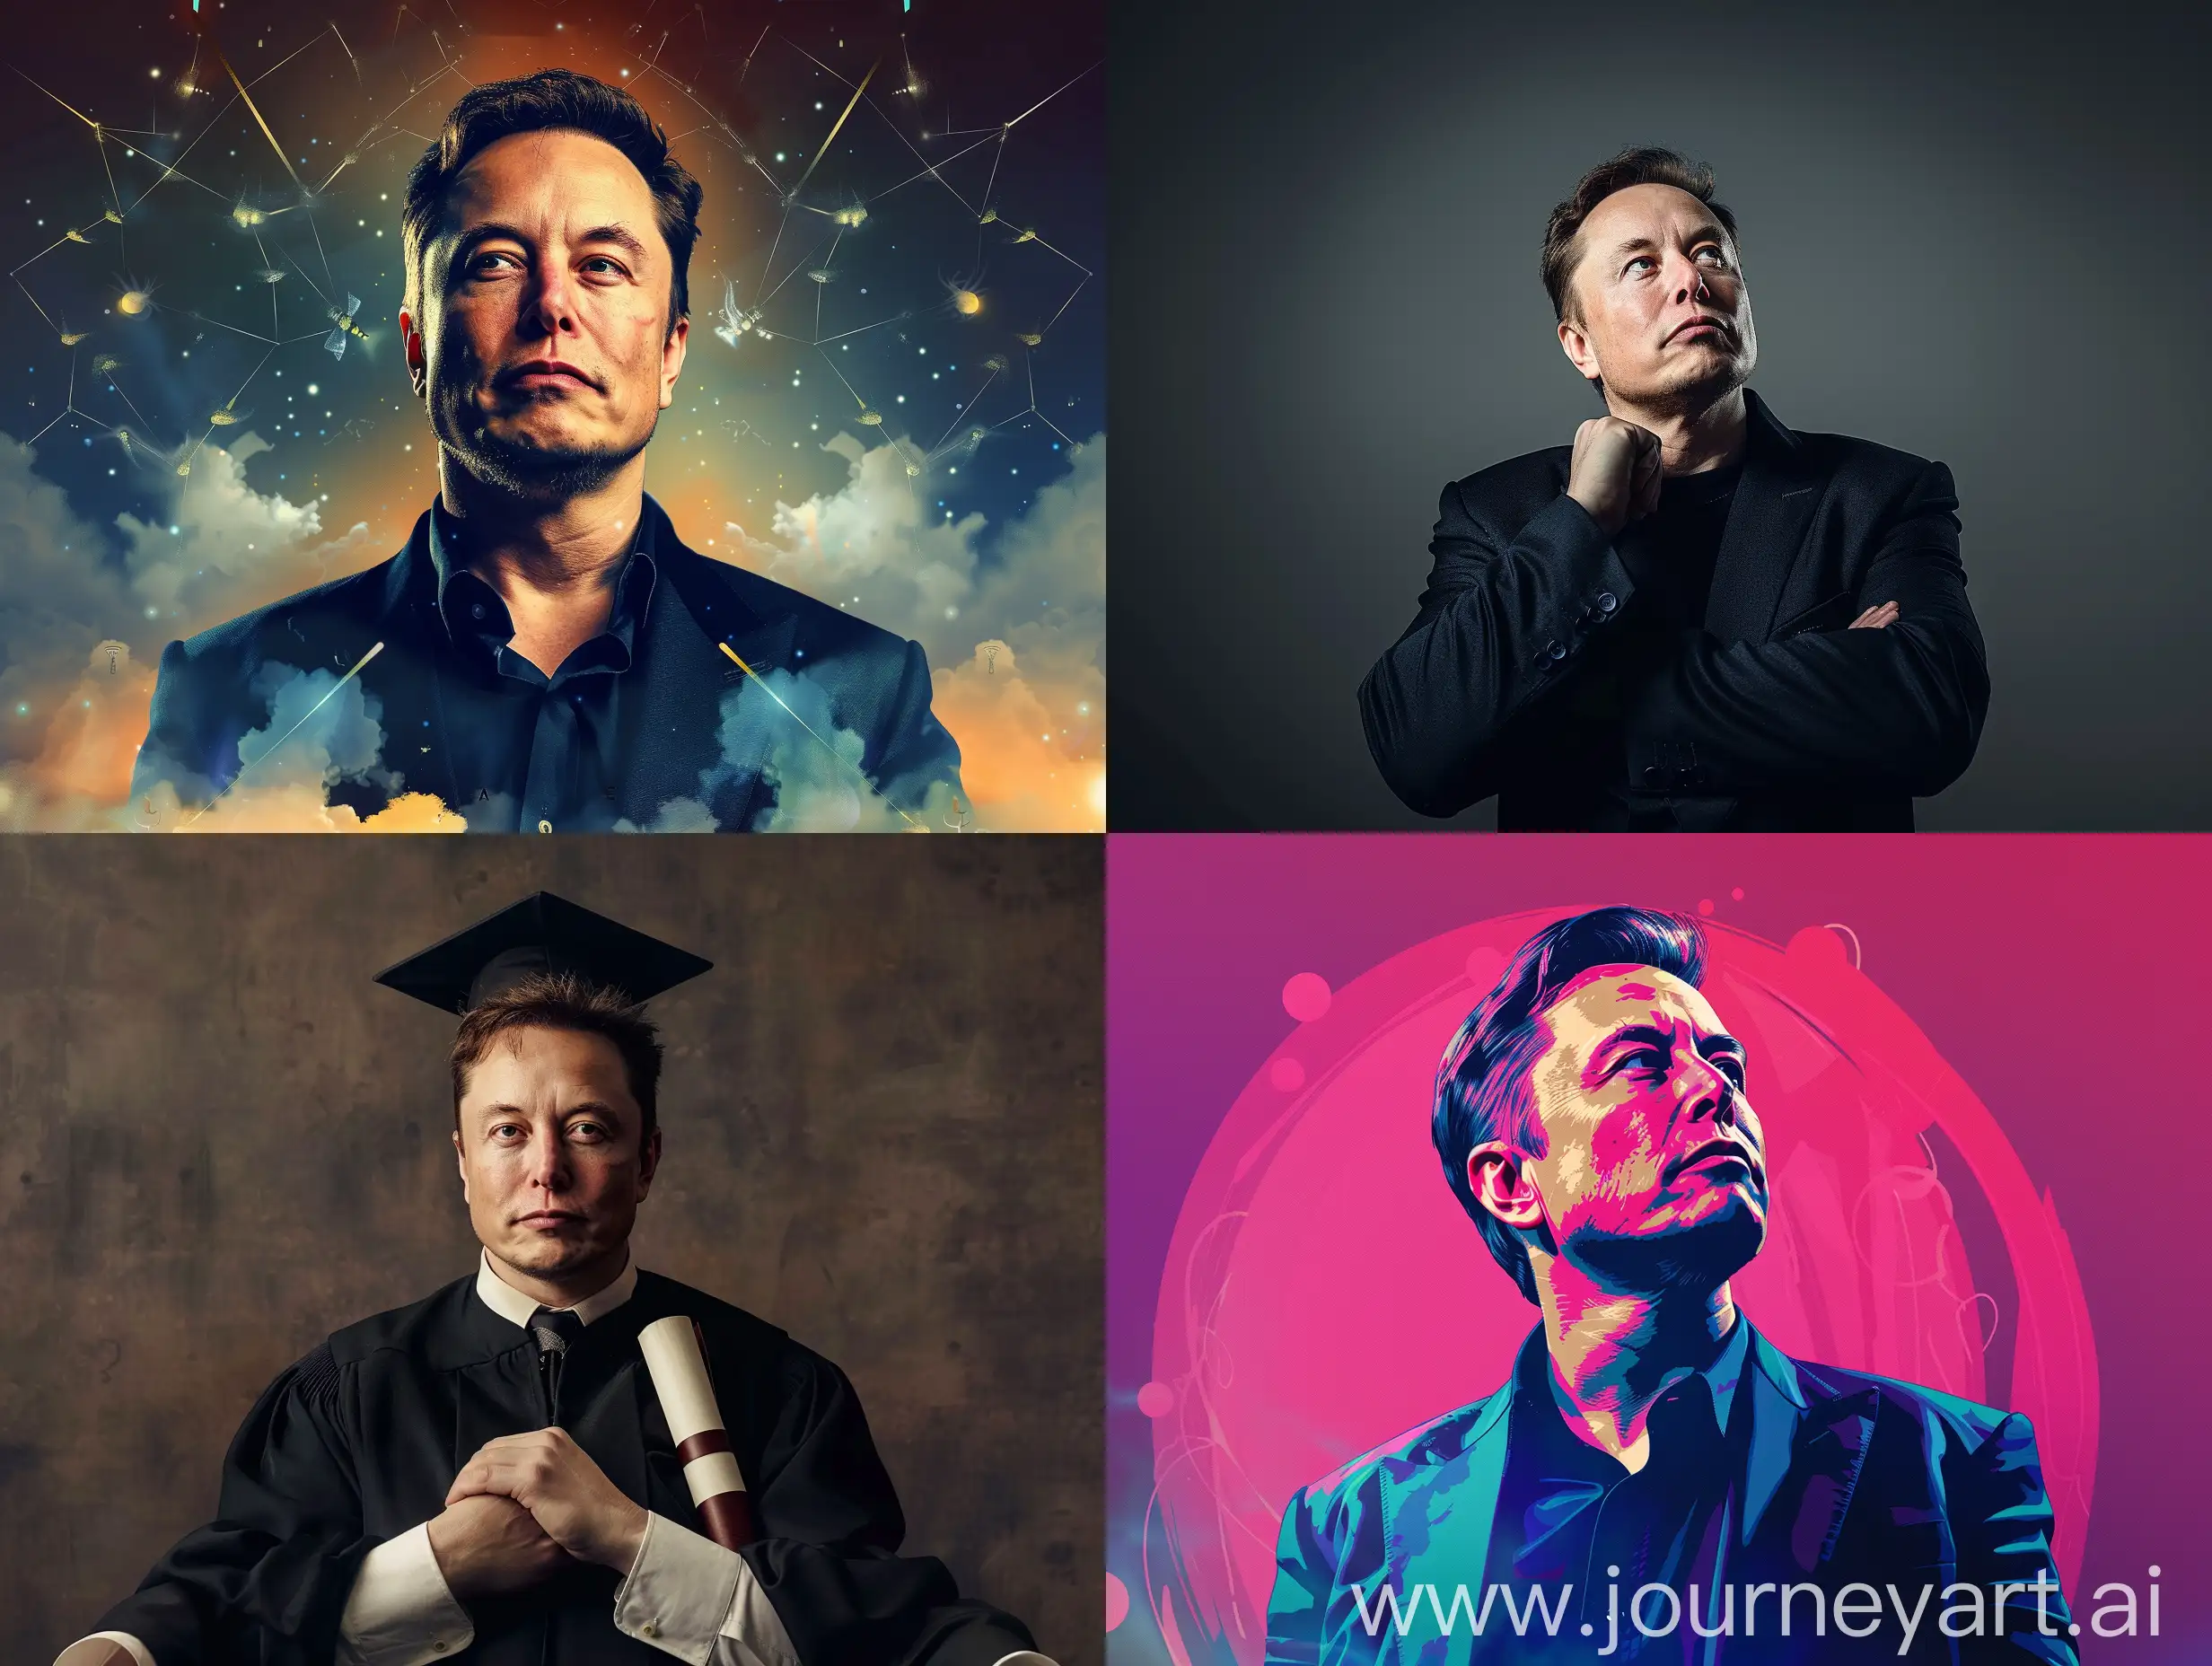 Elon-Musk-Demonstrating-Skills-Without-a-Degree